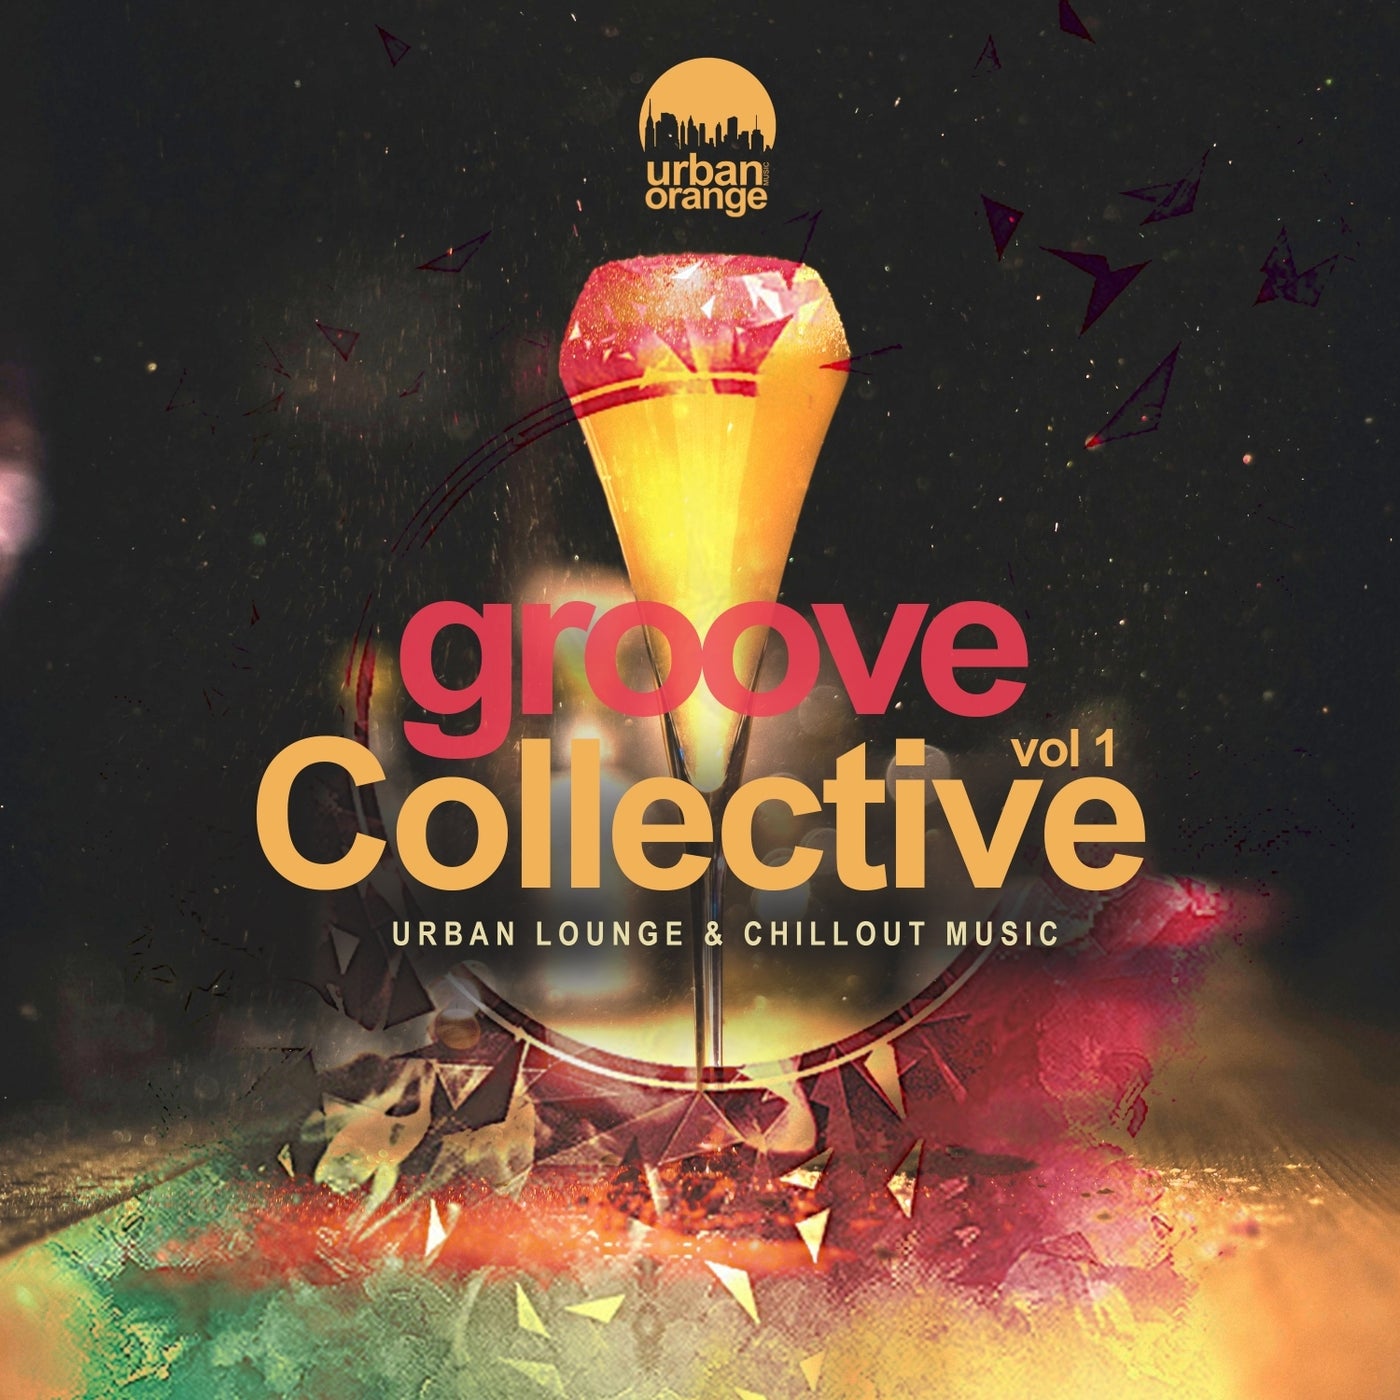 Groove Collective, Vol. 1: Urban Lounge & Chillout Music